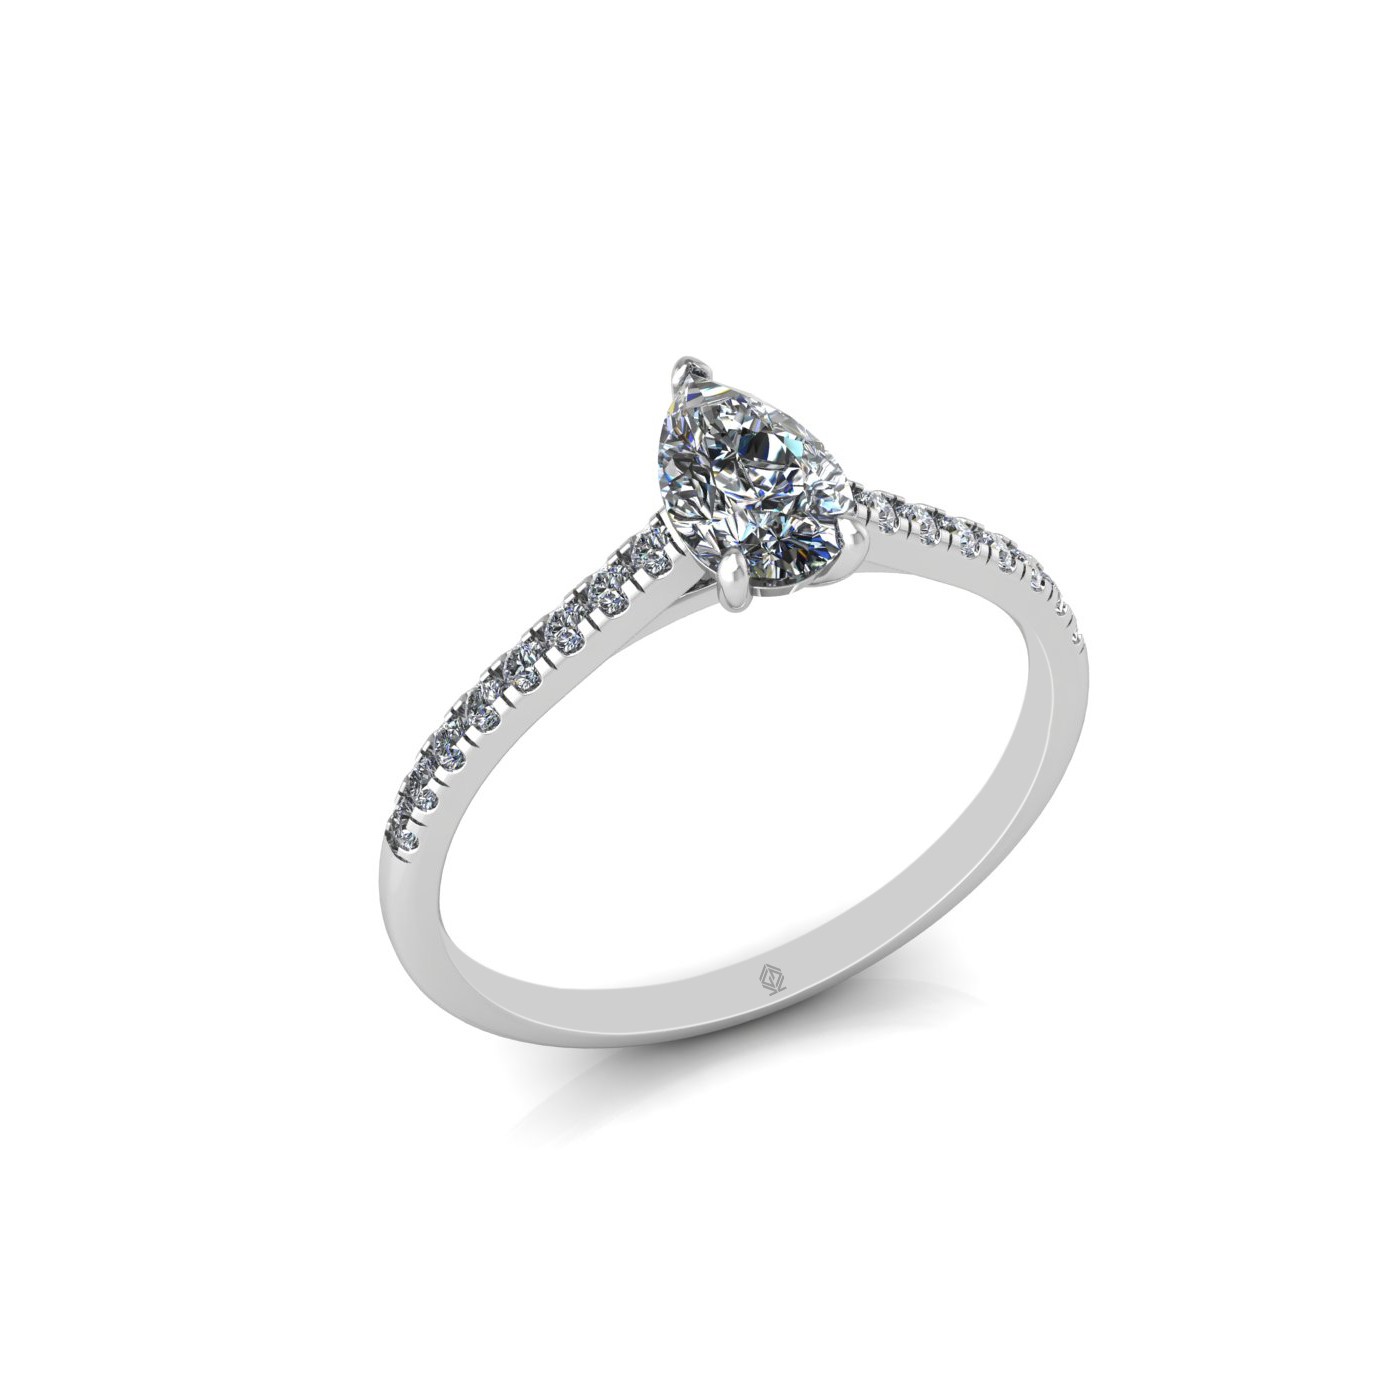 18k white gold  0,50 ct 3 prongs pear diamond engagement ring with whisper thin pavÉ set band